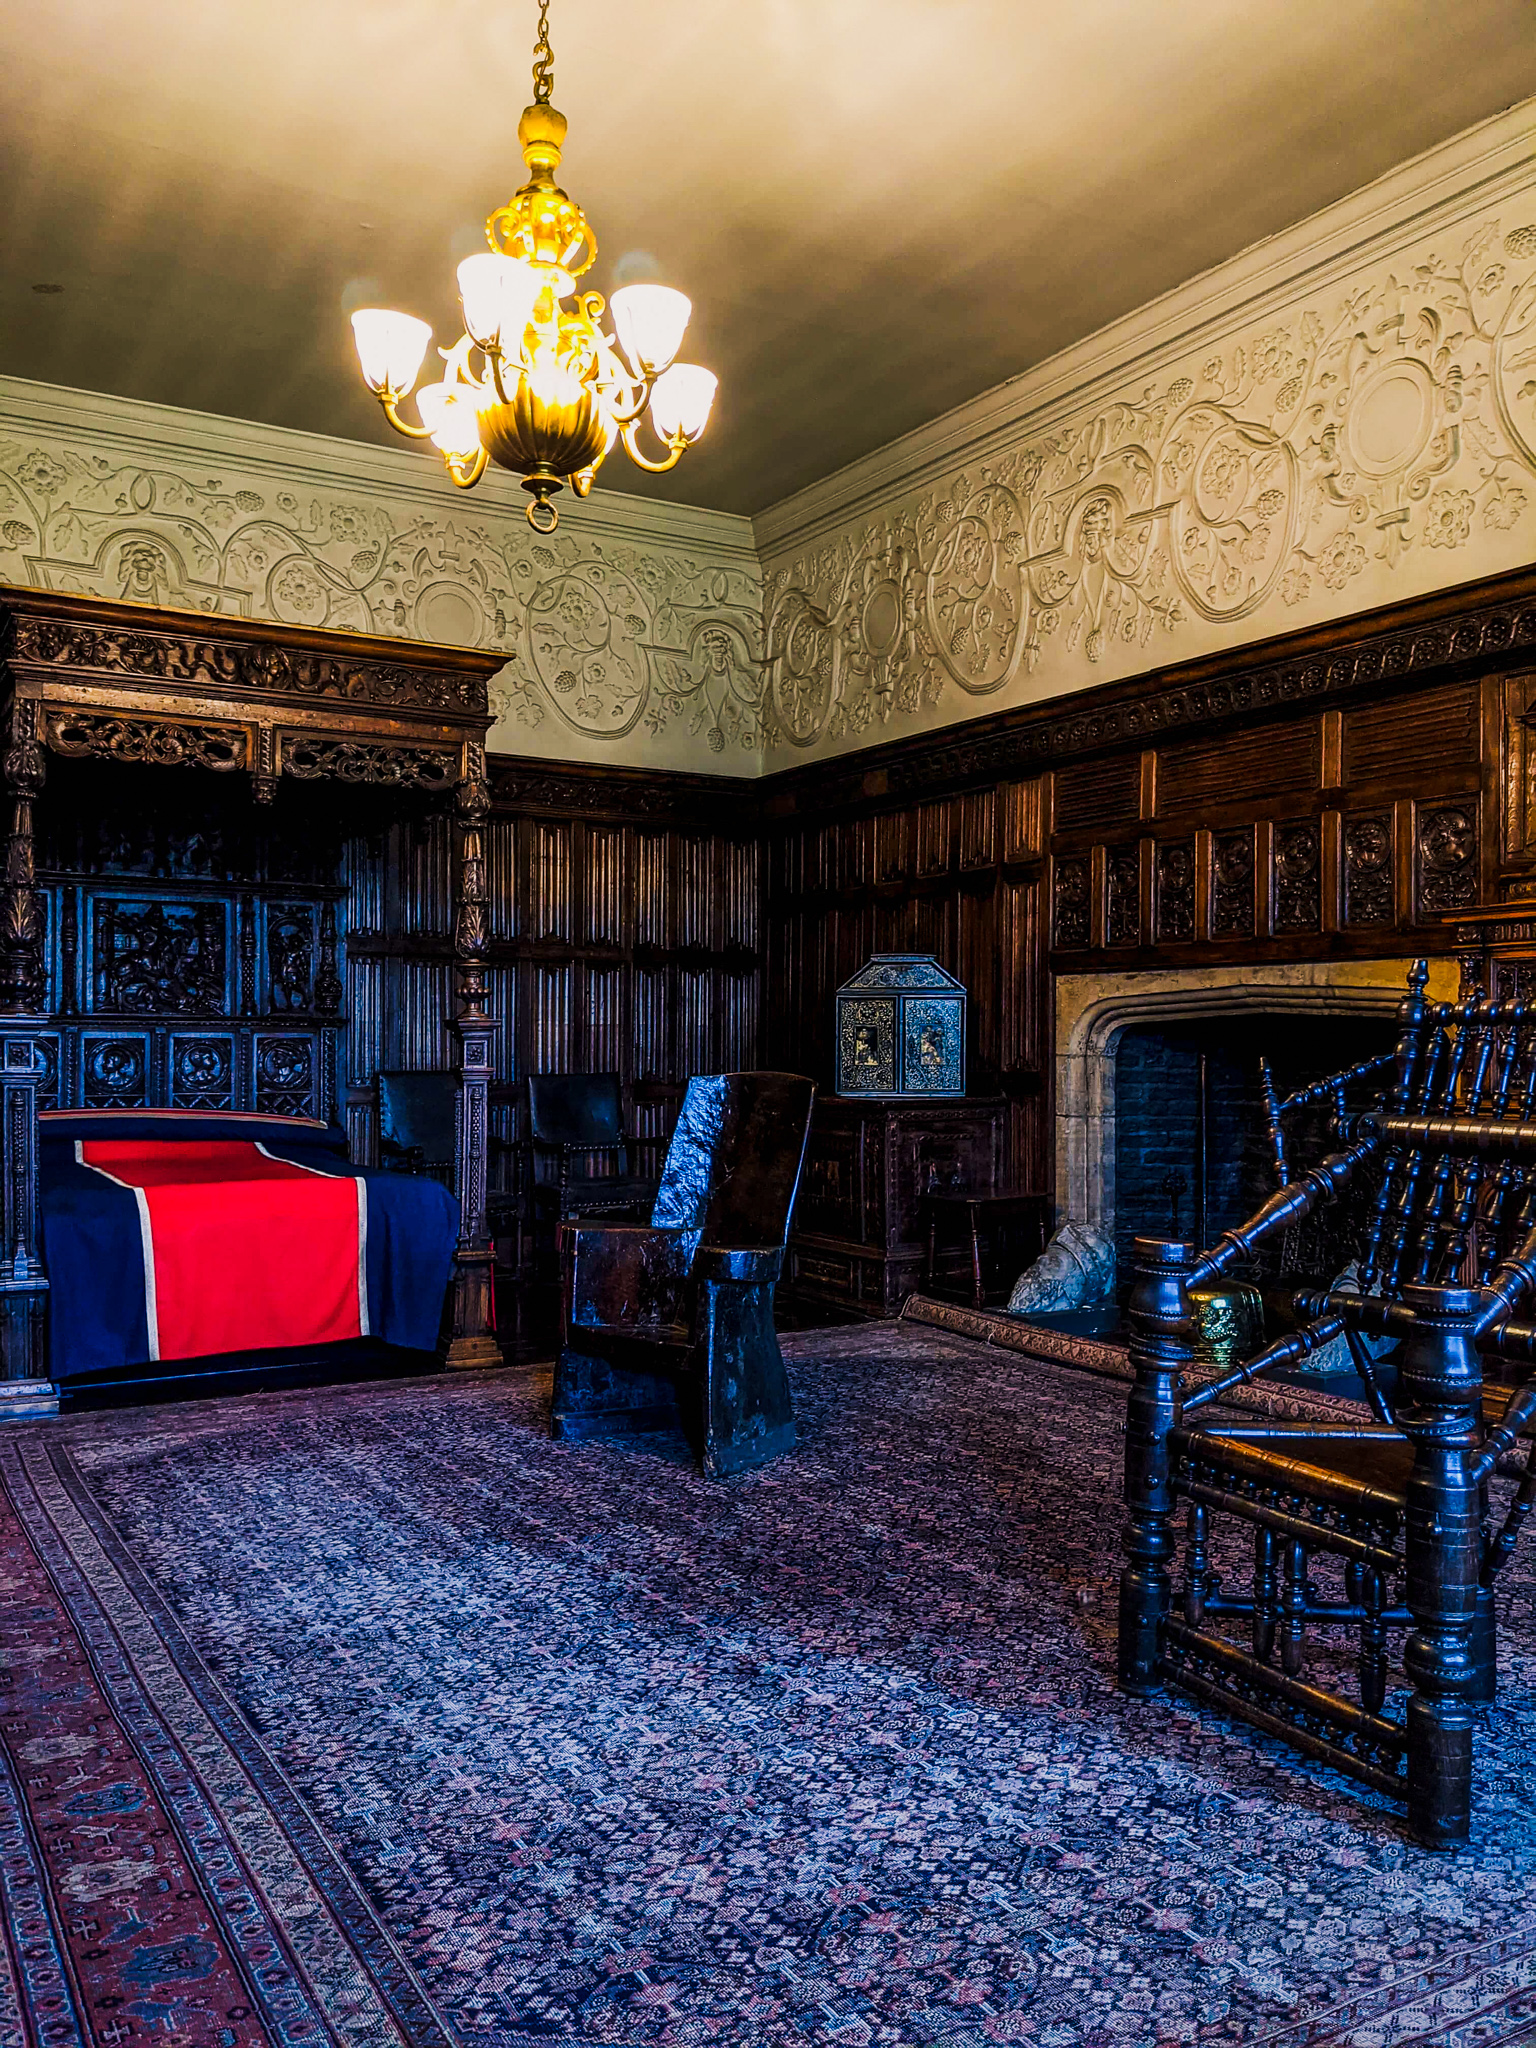 Henry VIII's bed in the Bretton room